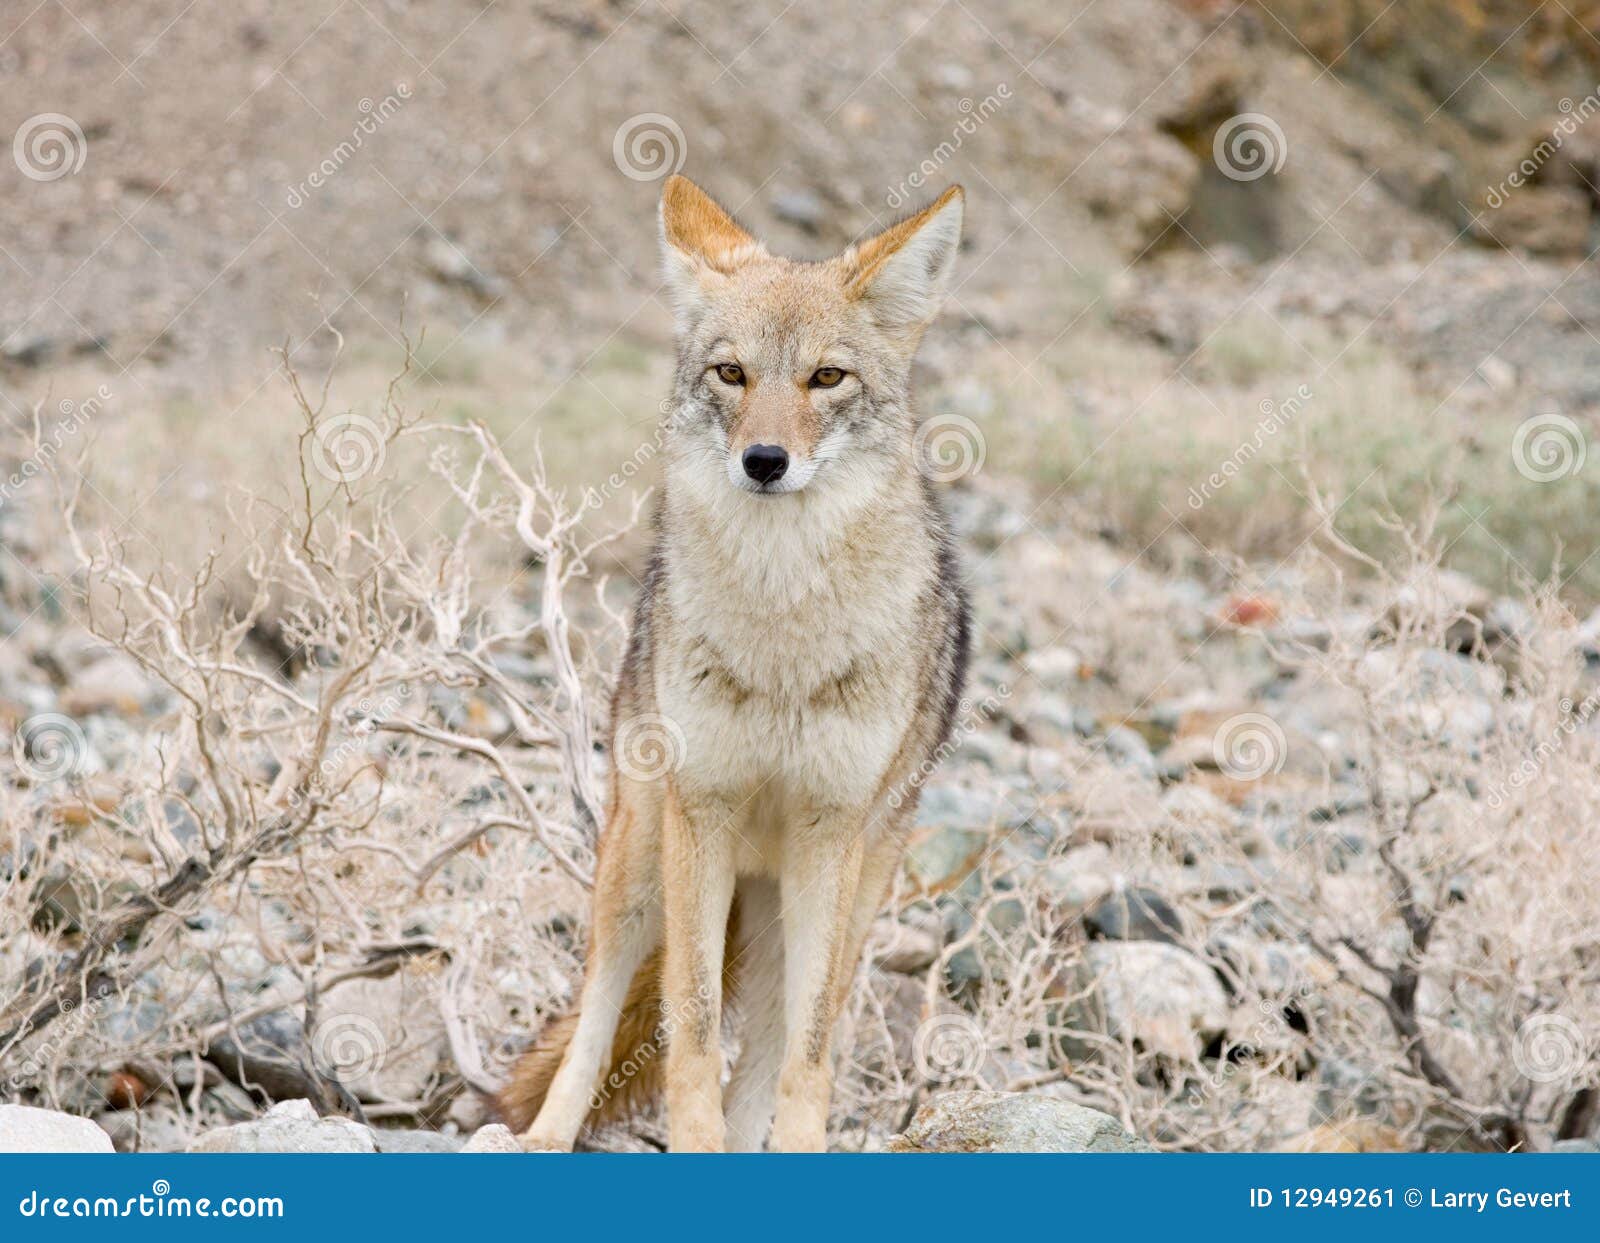 Coyote In The Desert. Stock Image - Image: 12949261